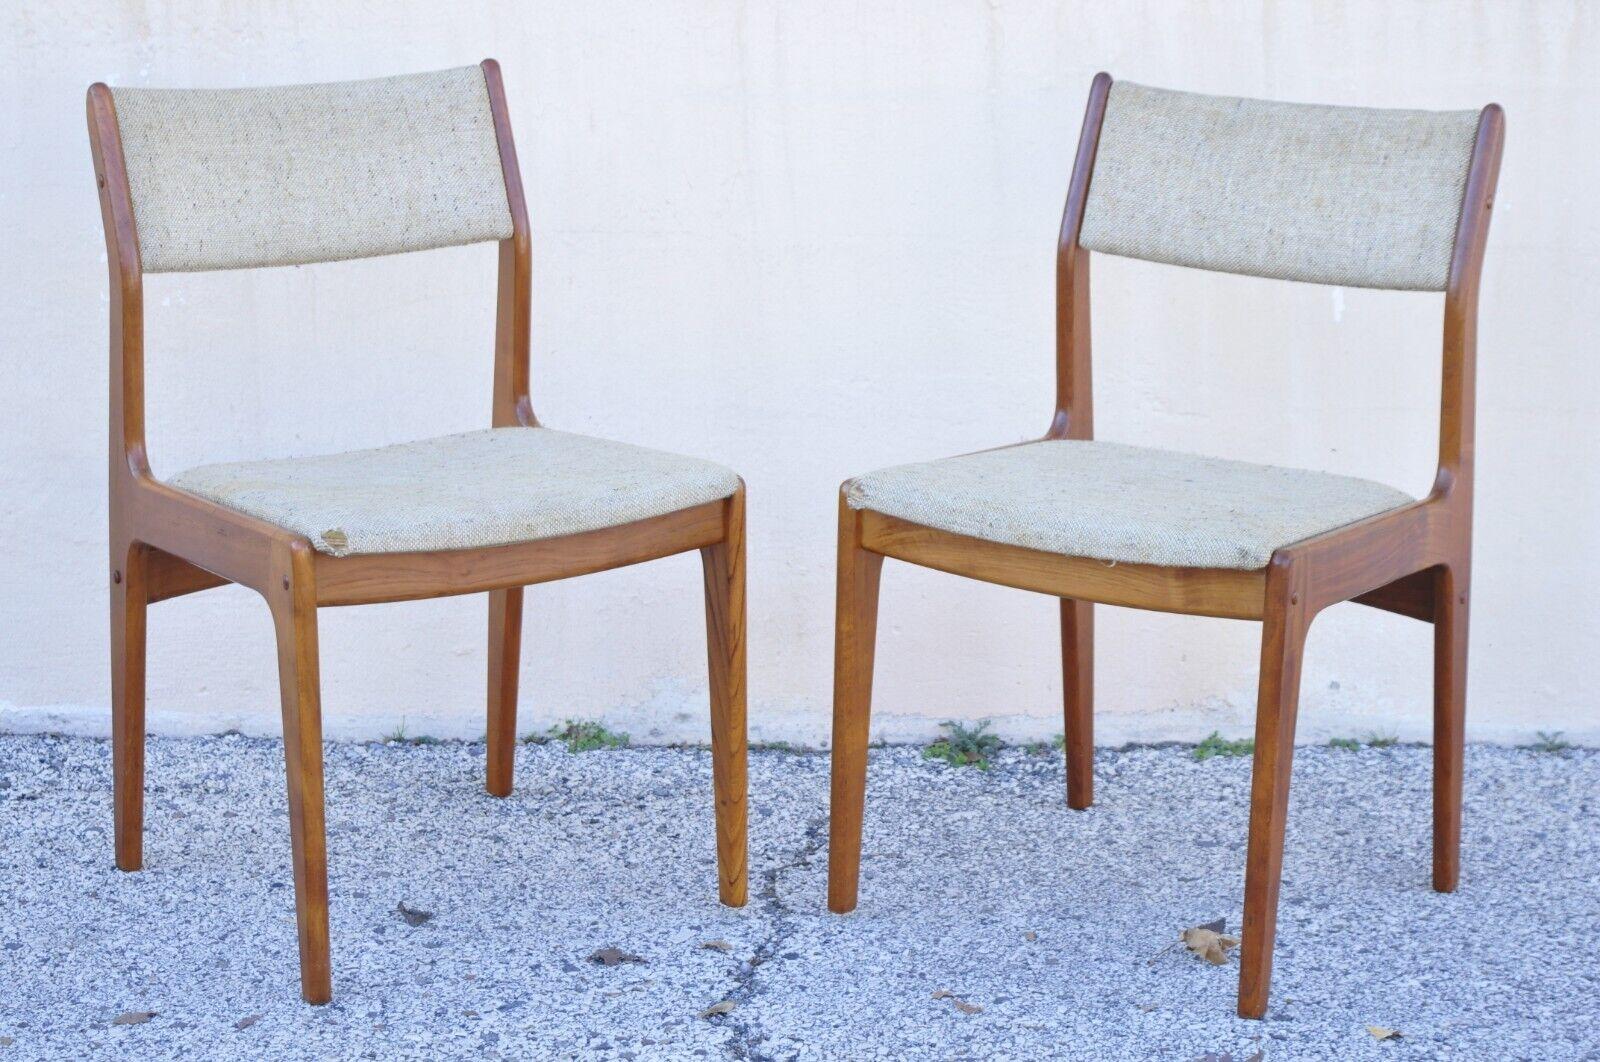 Vintage D-Scan Teak Wood Mid-Century Modern Danish Style dining chairs Set of 6. Item features (6) side chairs, solid wood frames, beautiful wood grain, original label, clean modernist lines. Circa Late 20th Century. Measurements: 32.5